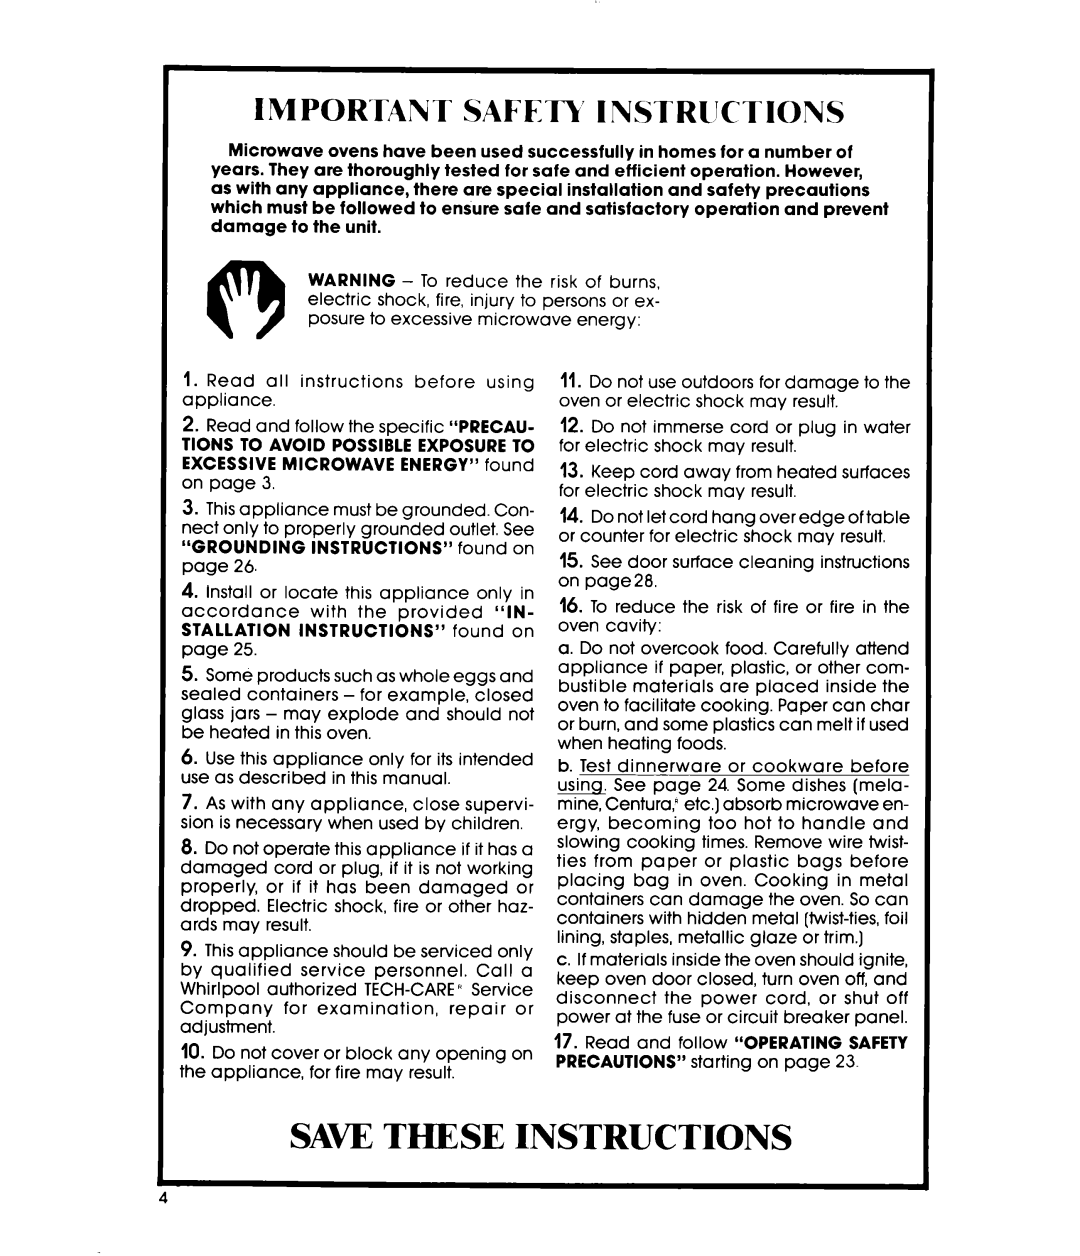 Whirlpool MW8570XR manual Saw These Instructions, Important Safety Instructions 